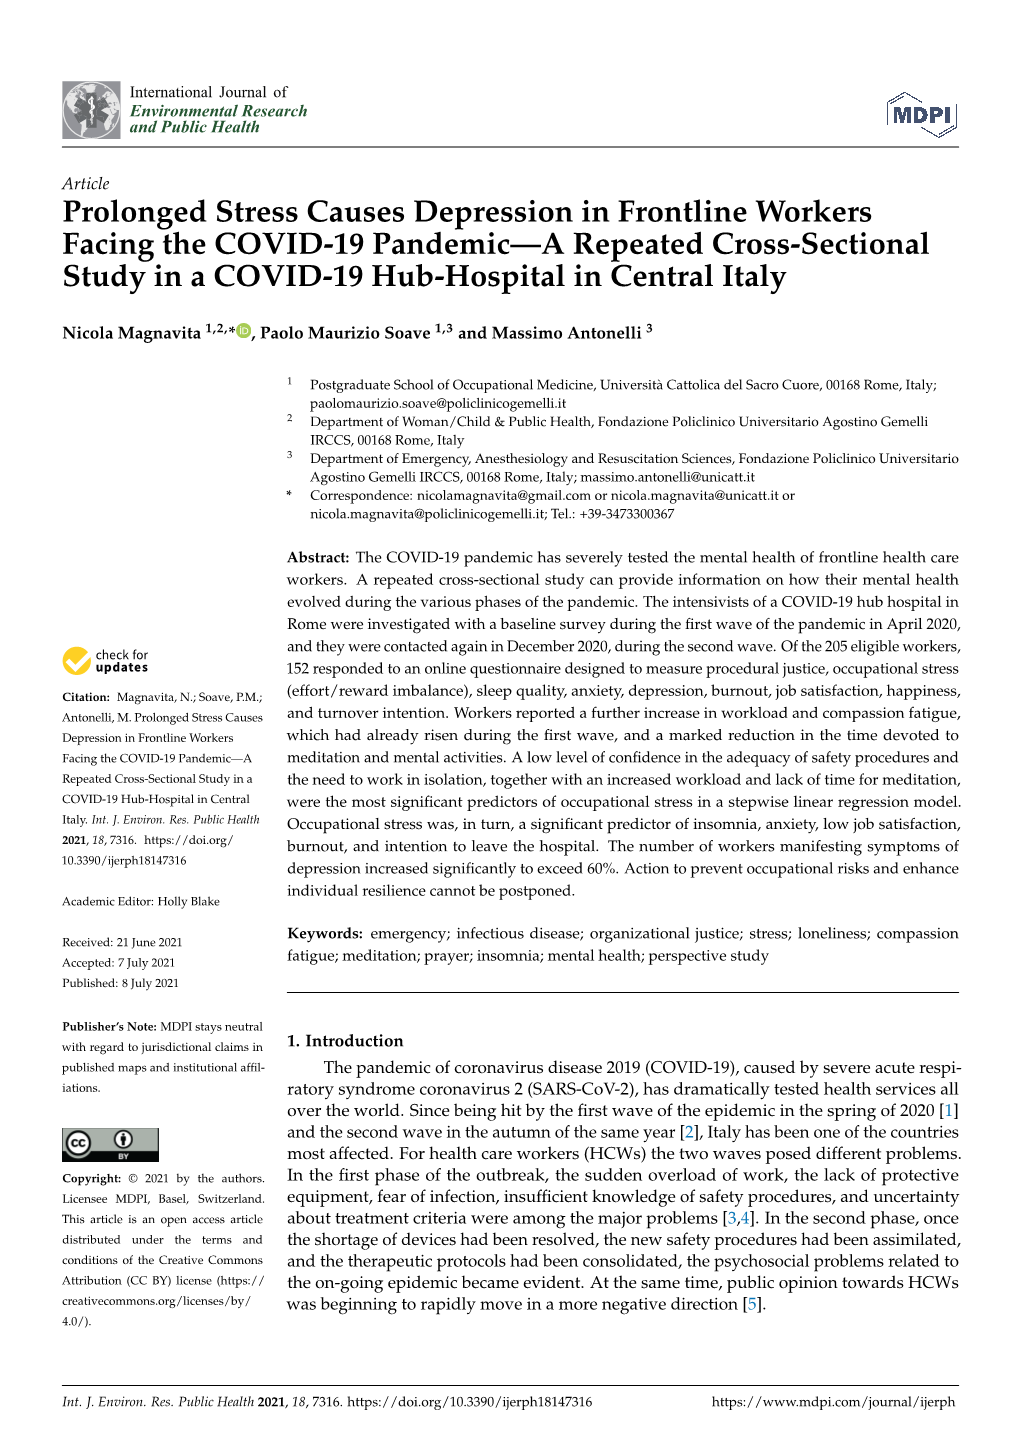 Prolonged Stress Causes Depression in Frontline Workers Facing the COVID-19 Pandemic—A Repeated Cross-Sectional Study in a COVID-19 Hub-Hospital in Central Italy